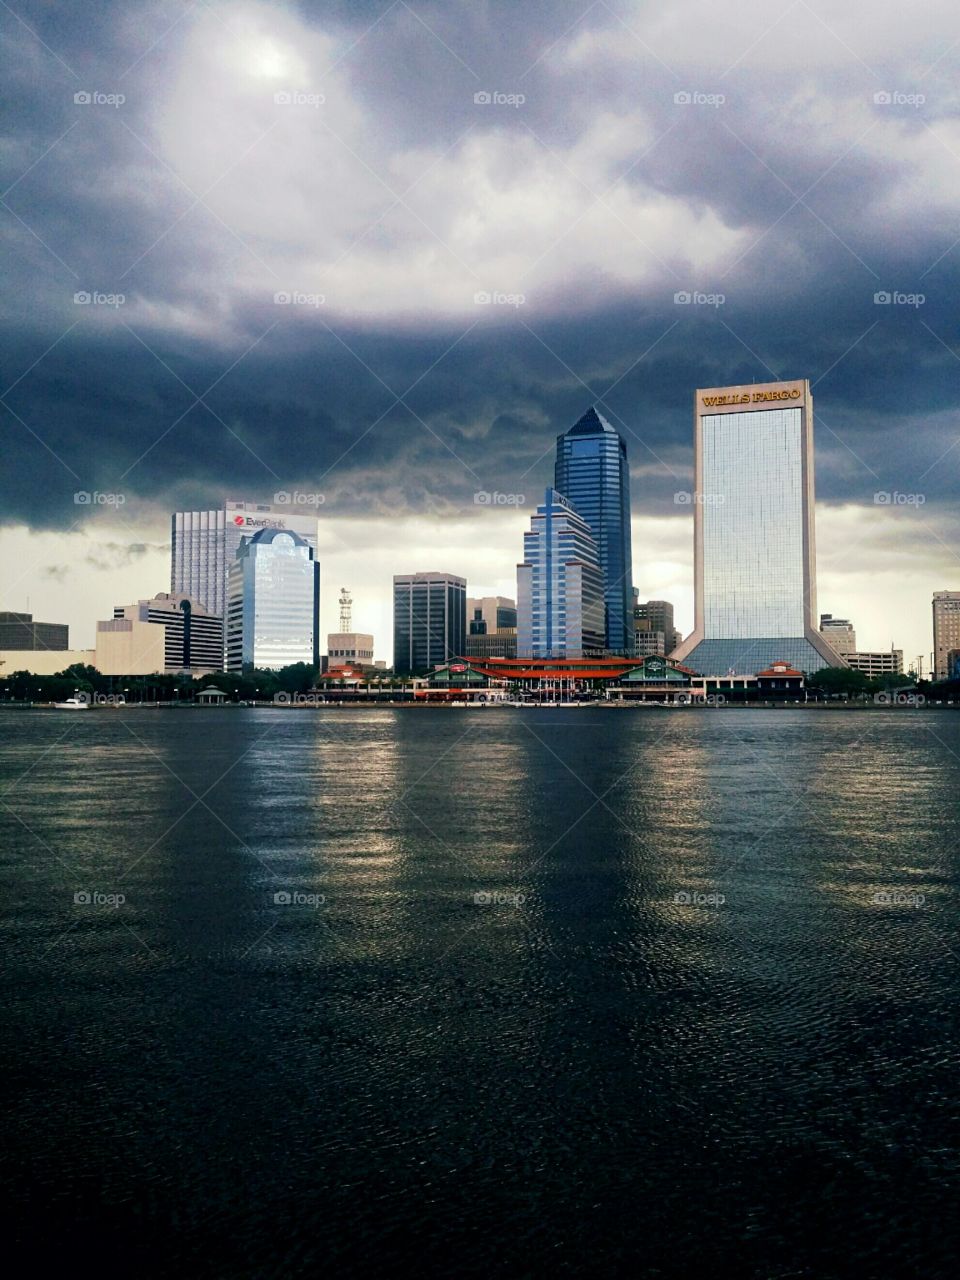 storming over downtown